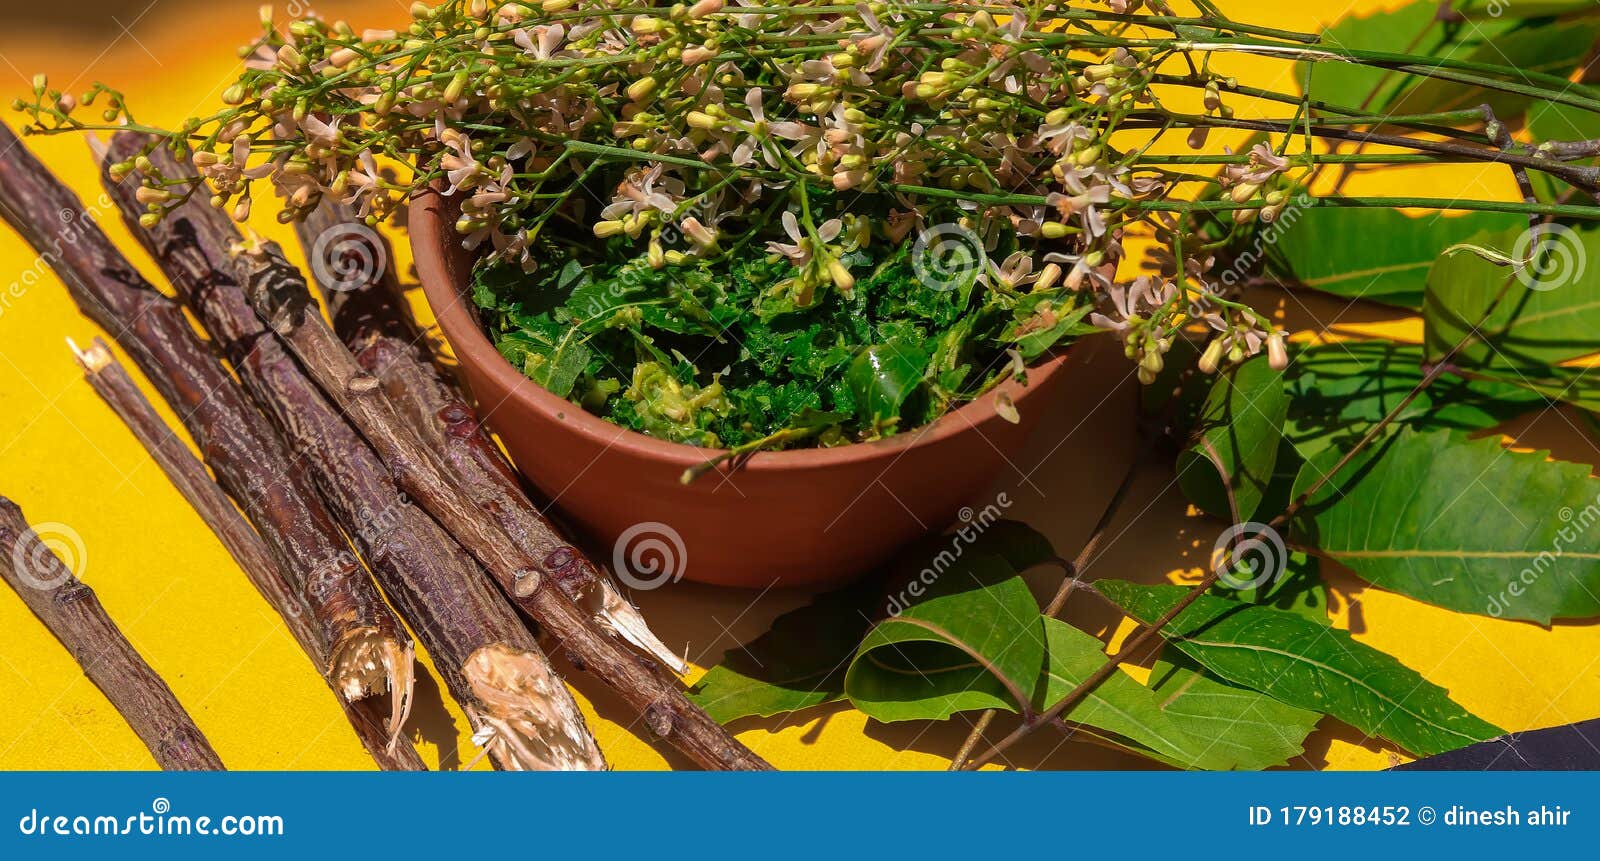 Yellow Dried Leaves of Neem Tree on the Ground. Stock Image - Image of  leaf, leaves: 242797855